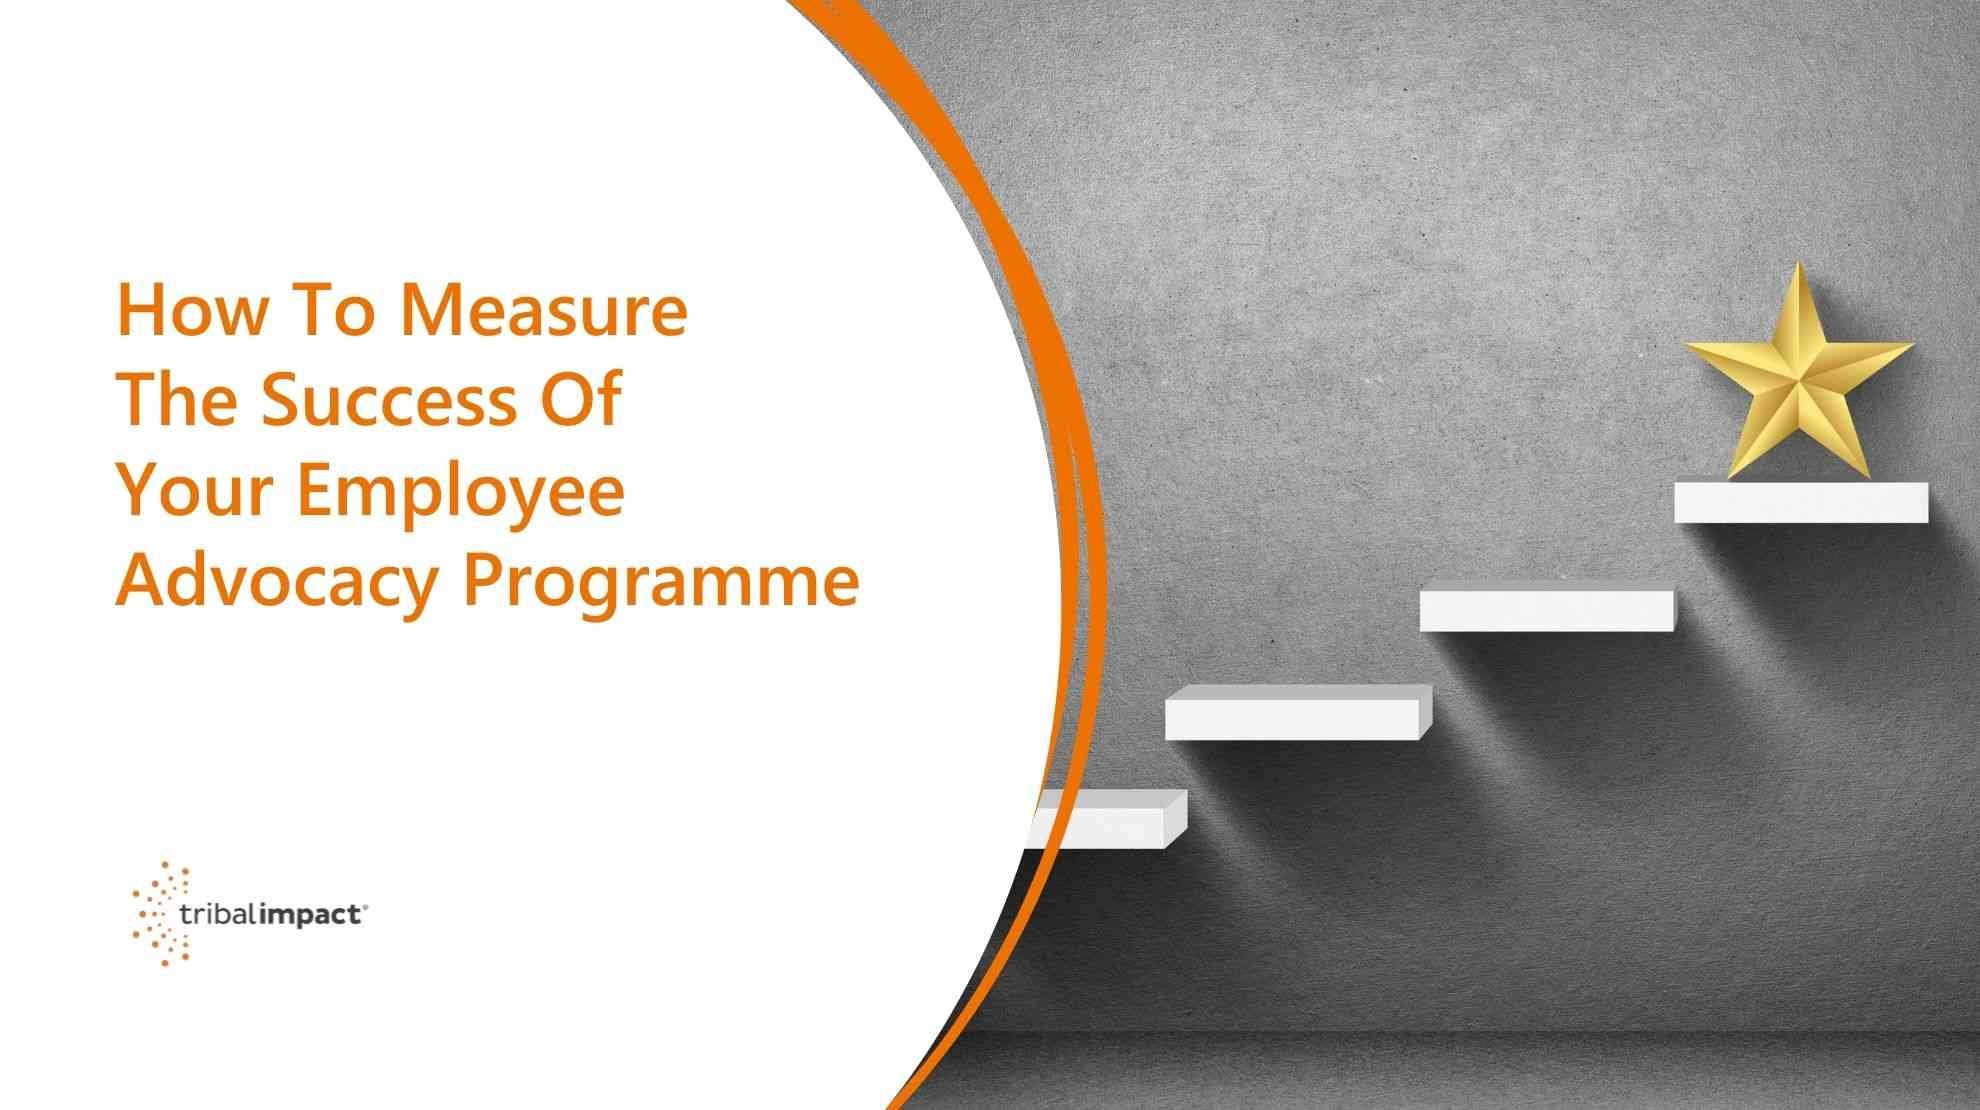 How To Measure The Success Of Your Employee Advocacy Programme blog post